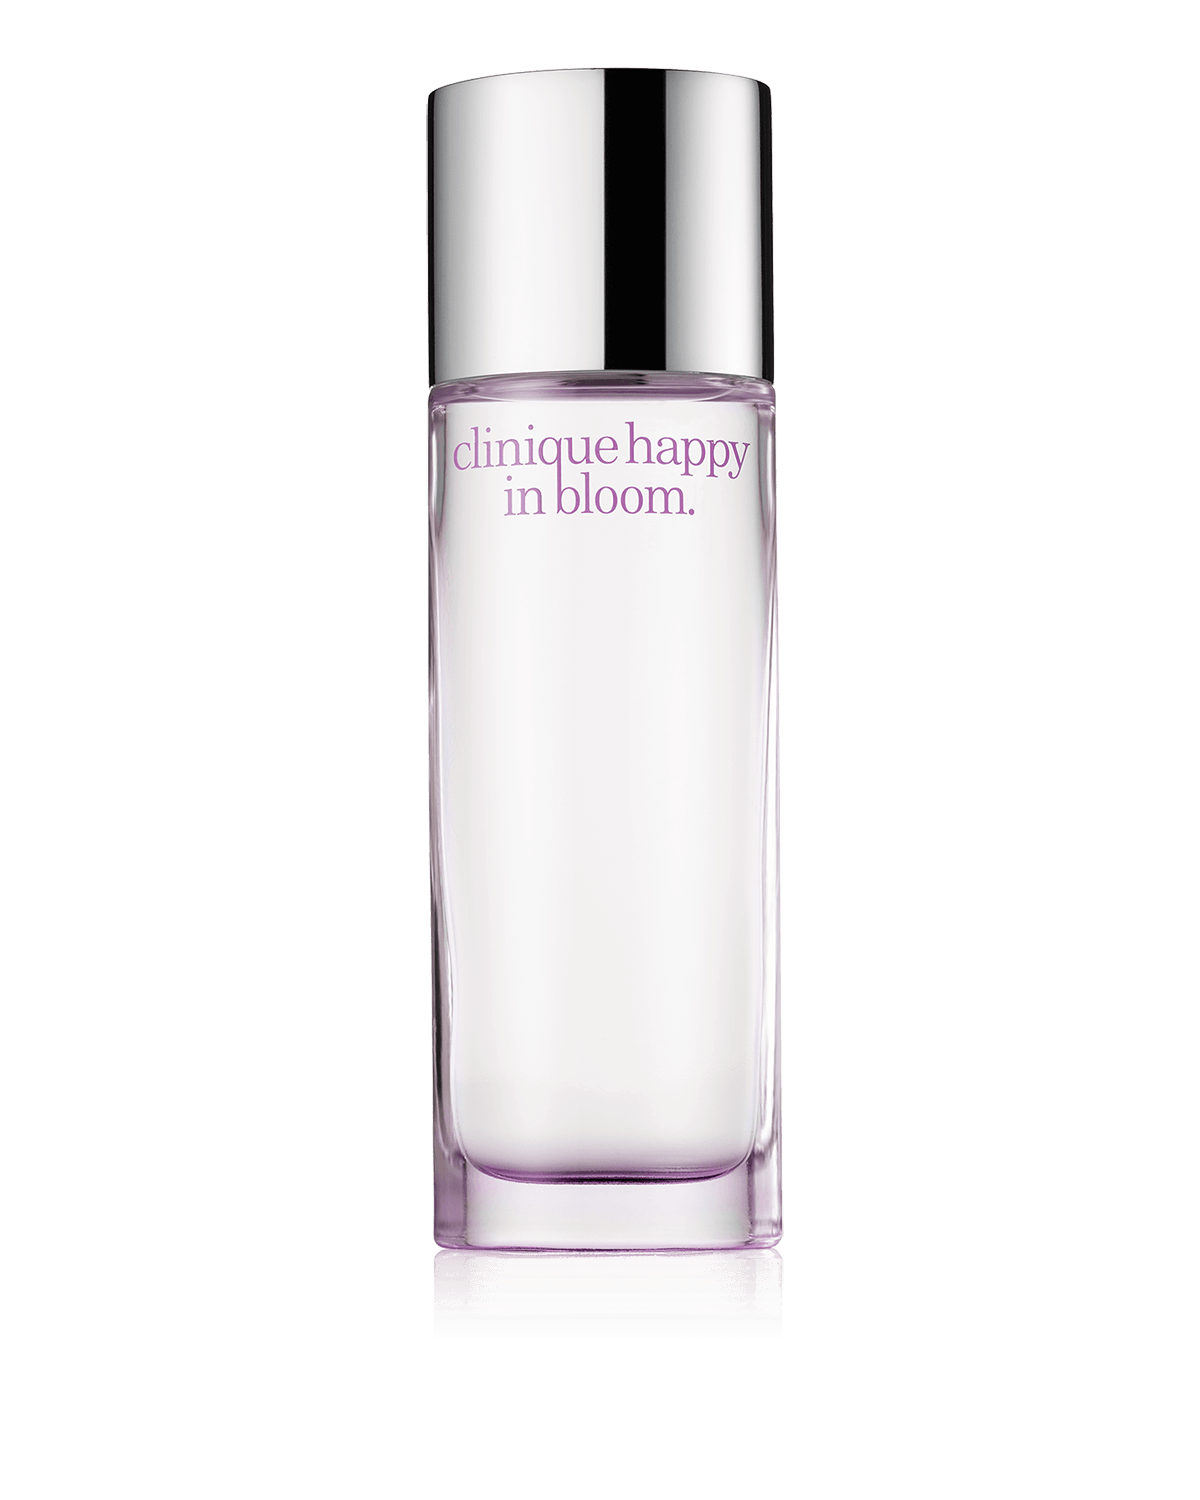 clinique happy in bloom 1.7 oz